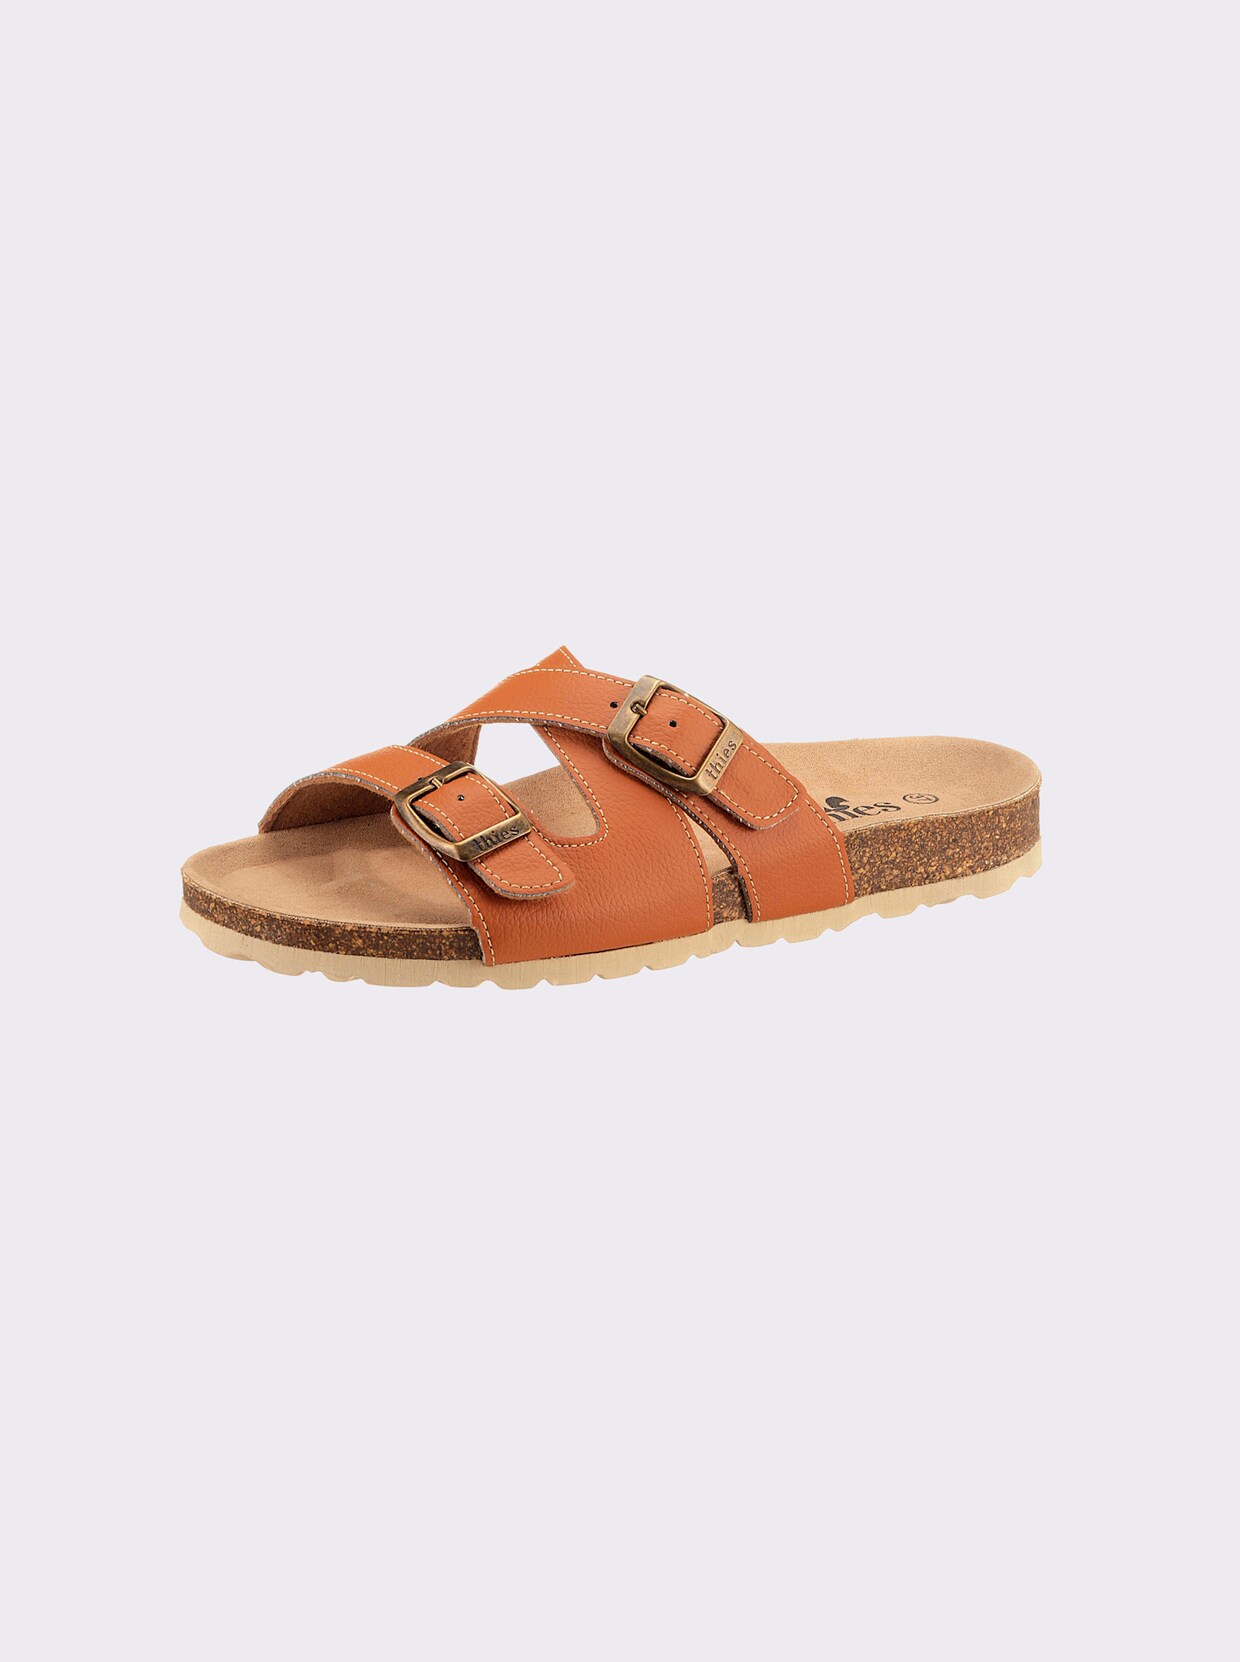 Thies slippers - cognac